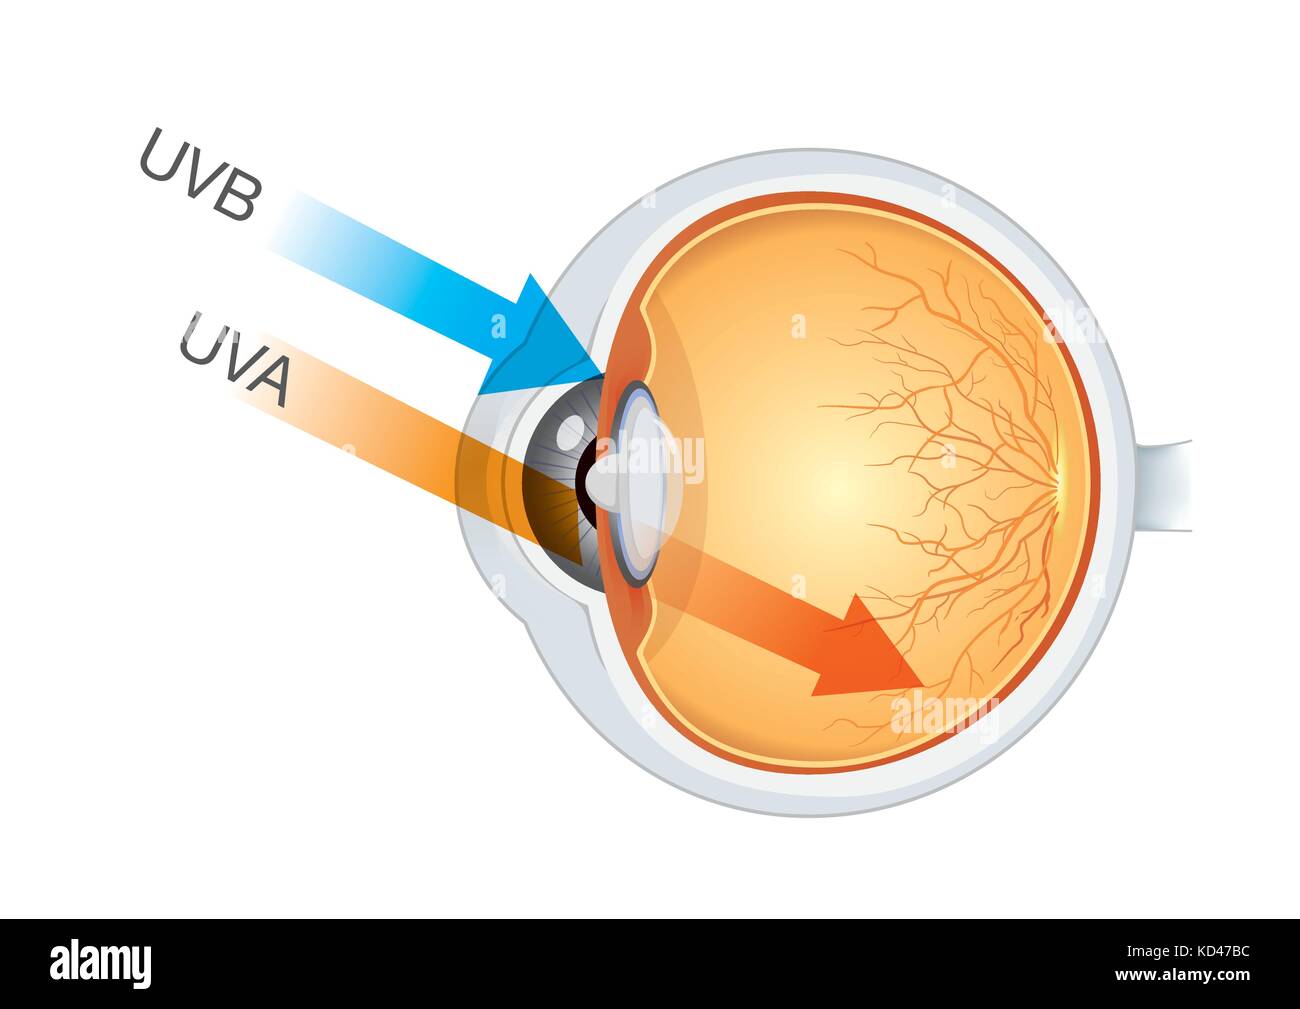 The difference of UVA and UVB from sunlight into eyes. Stock Vector